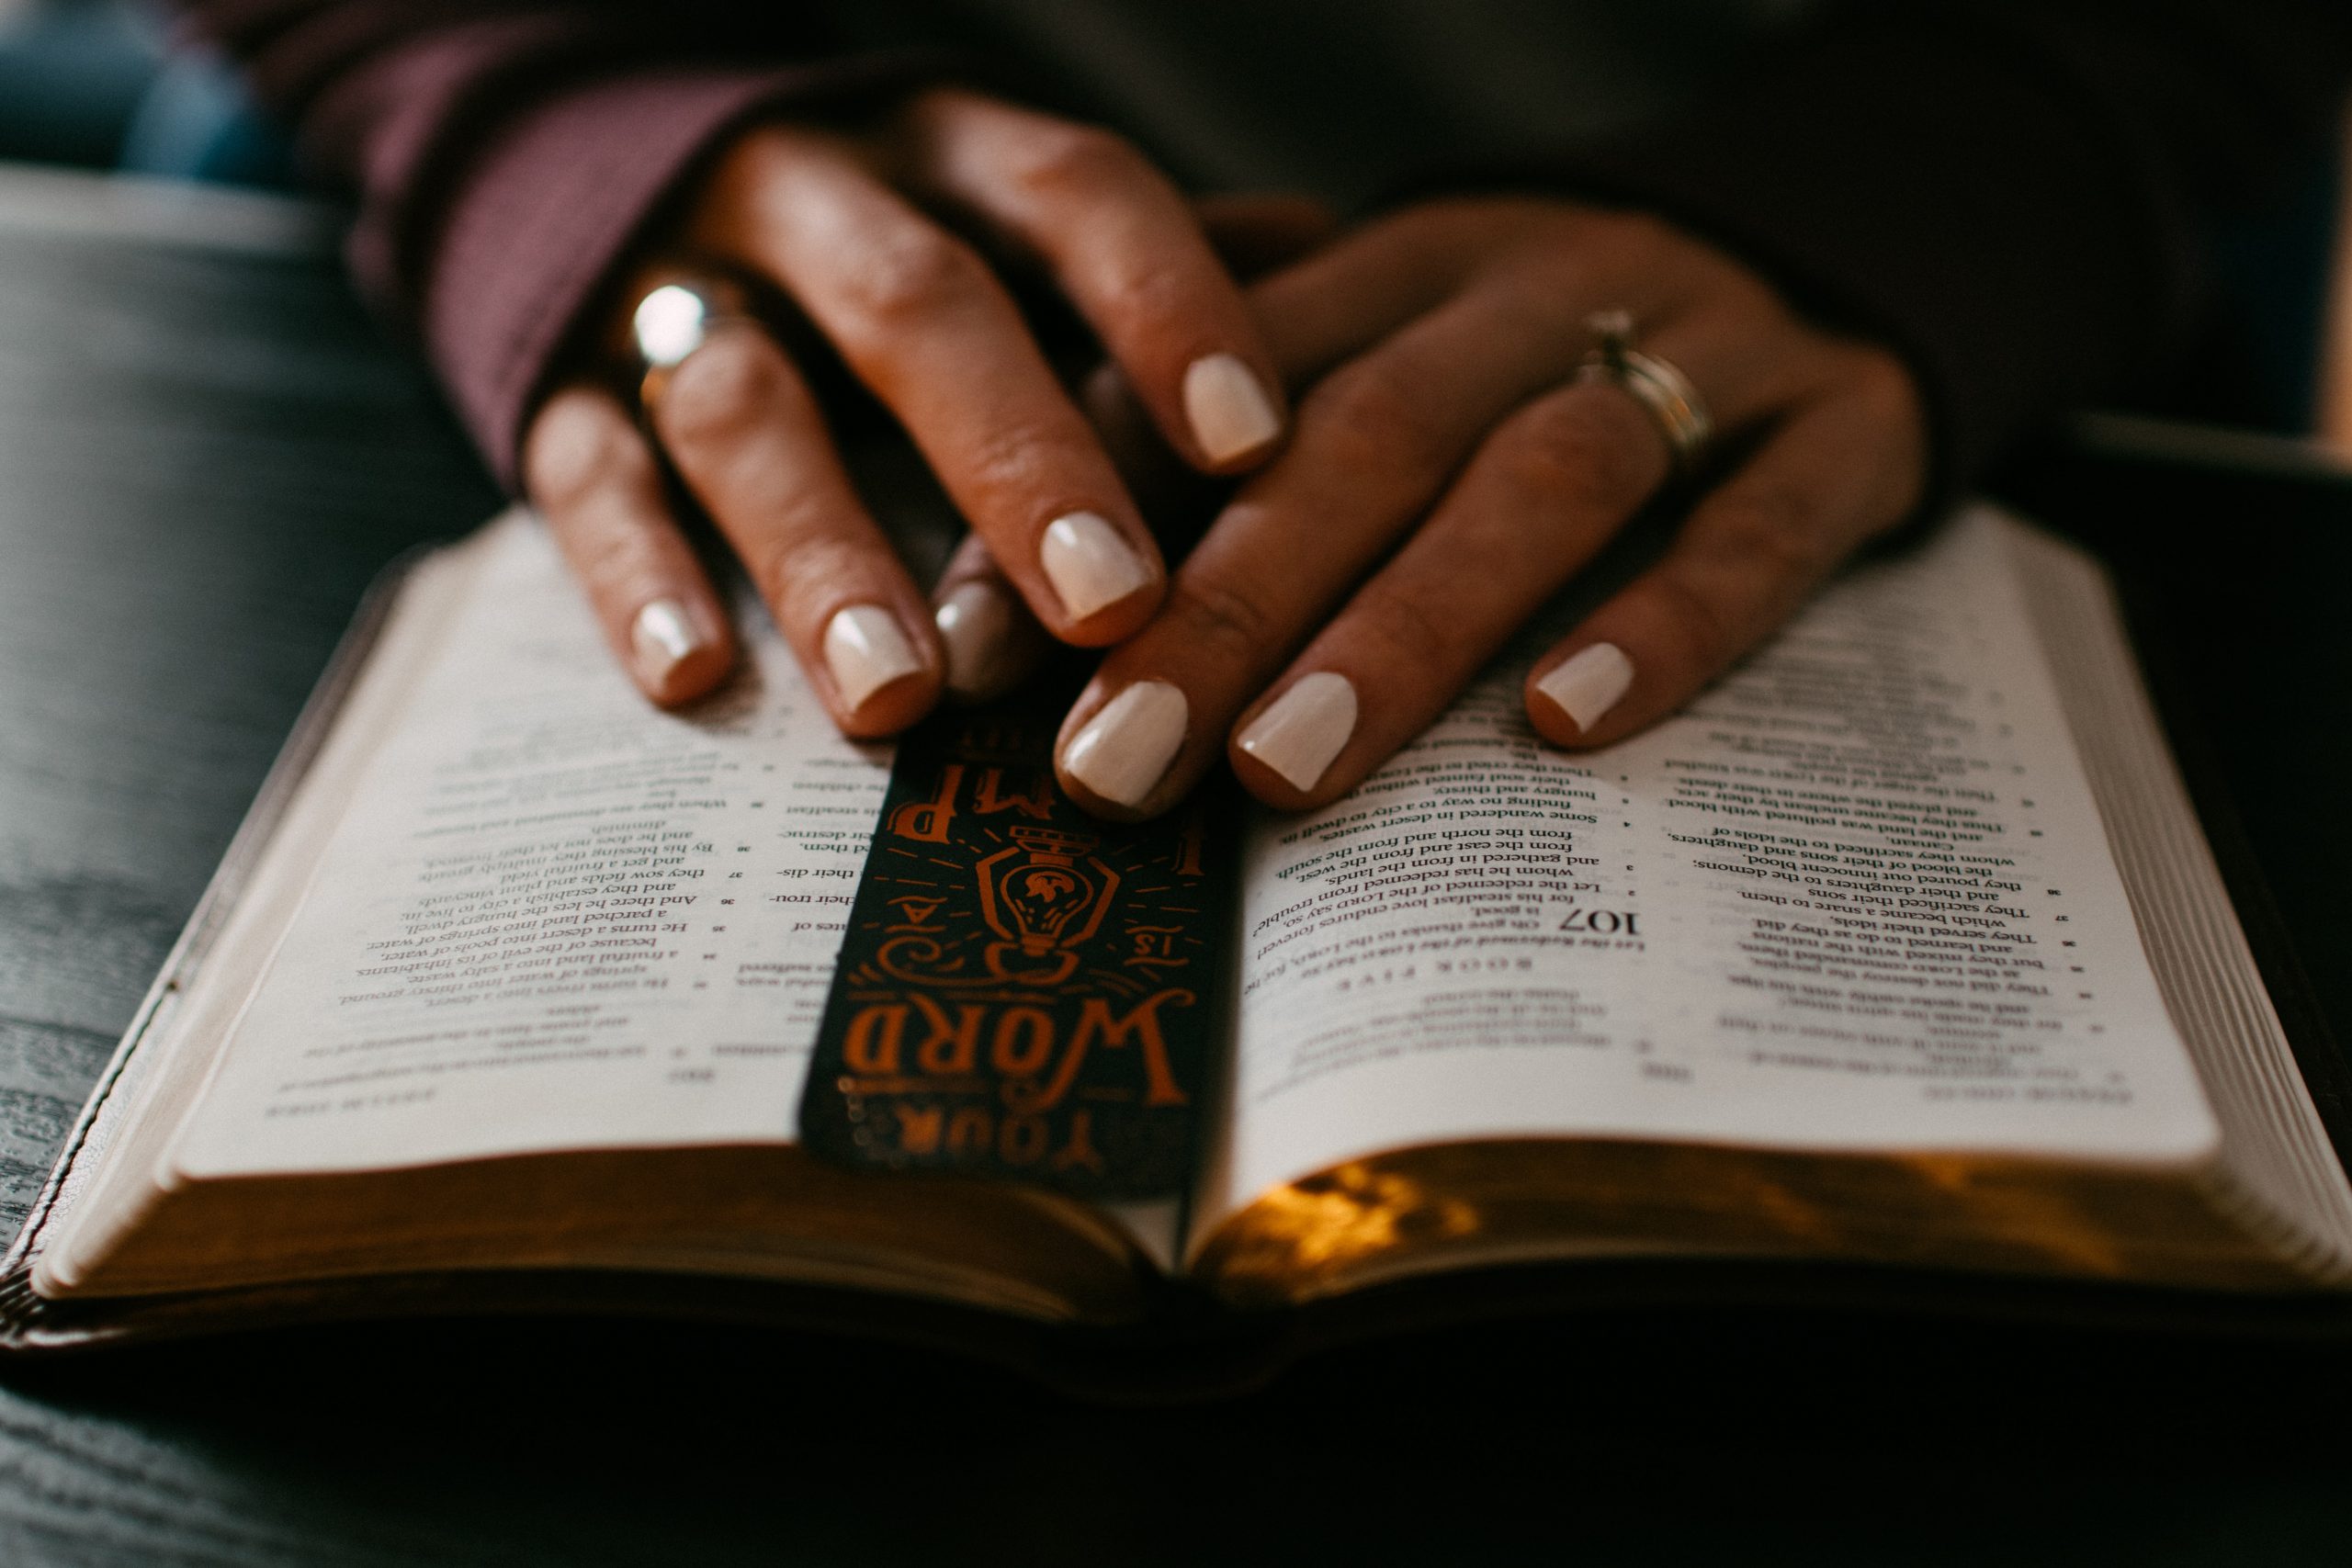 Woman's hands on a Bible